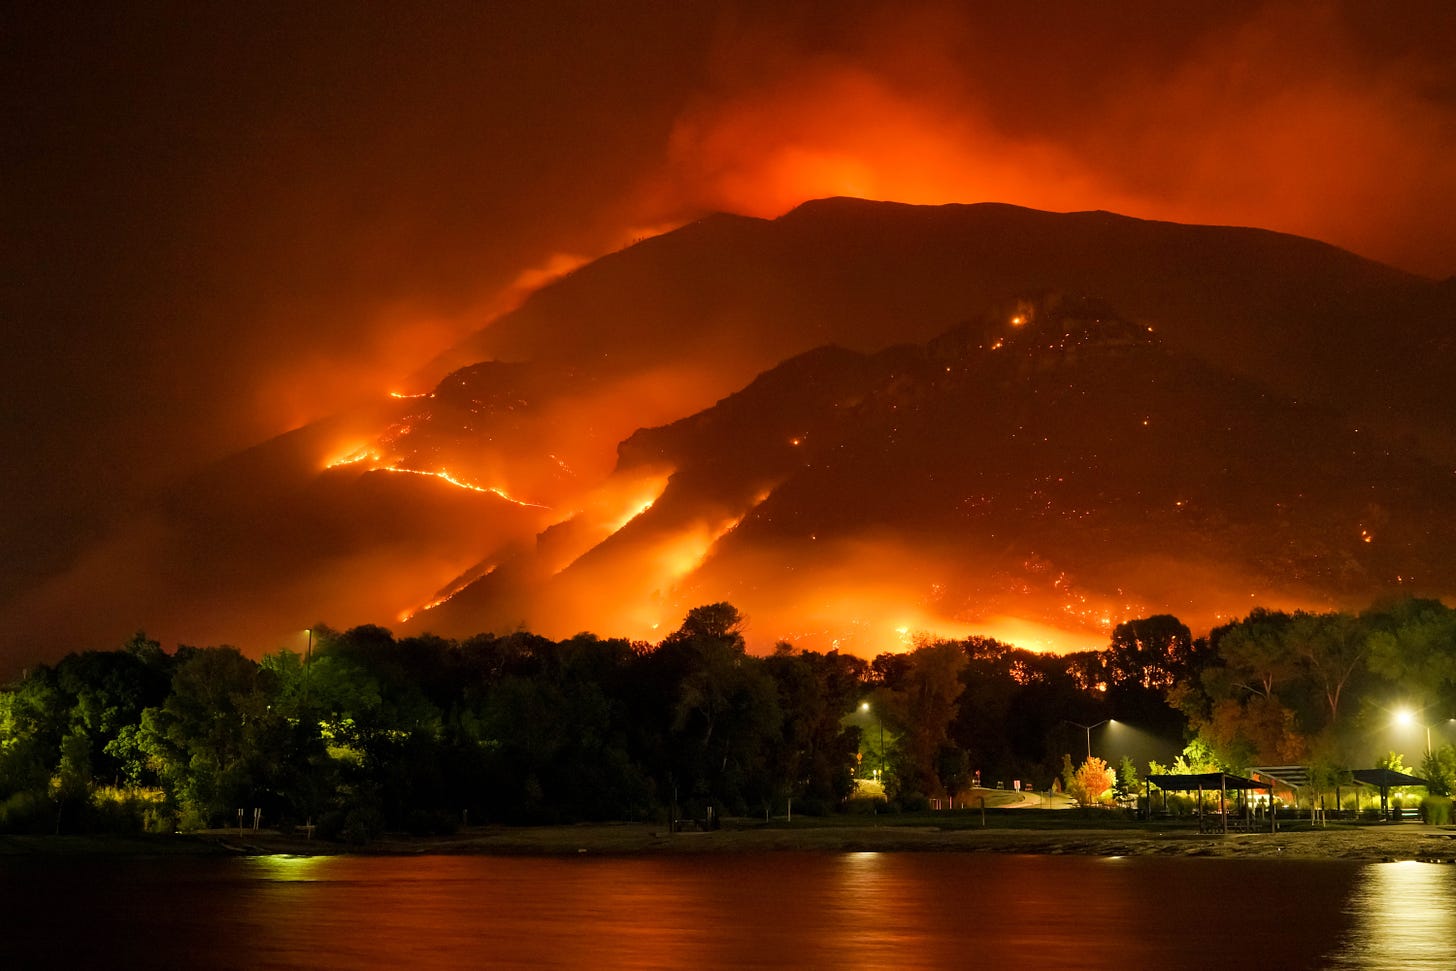 A photo of a wildfire consuming a mountainside.